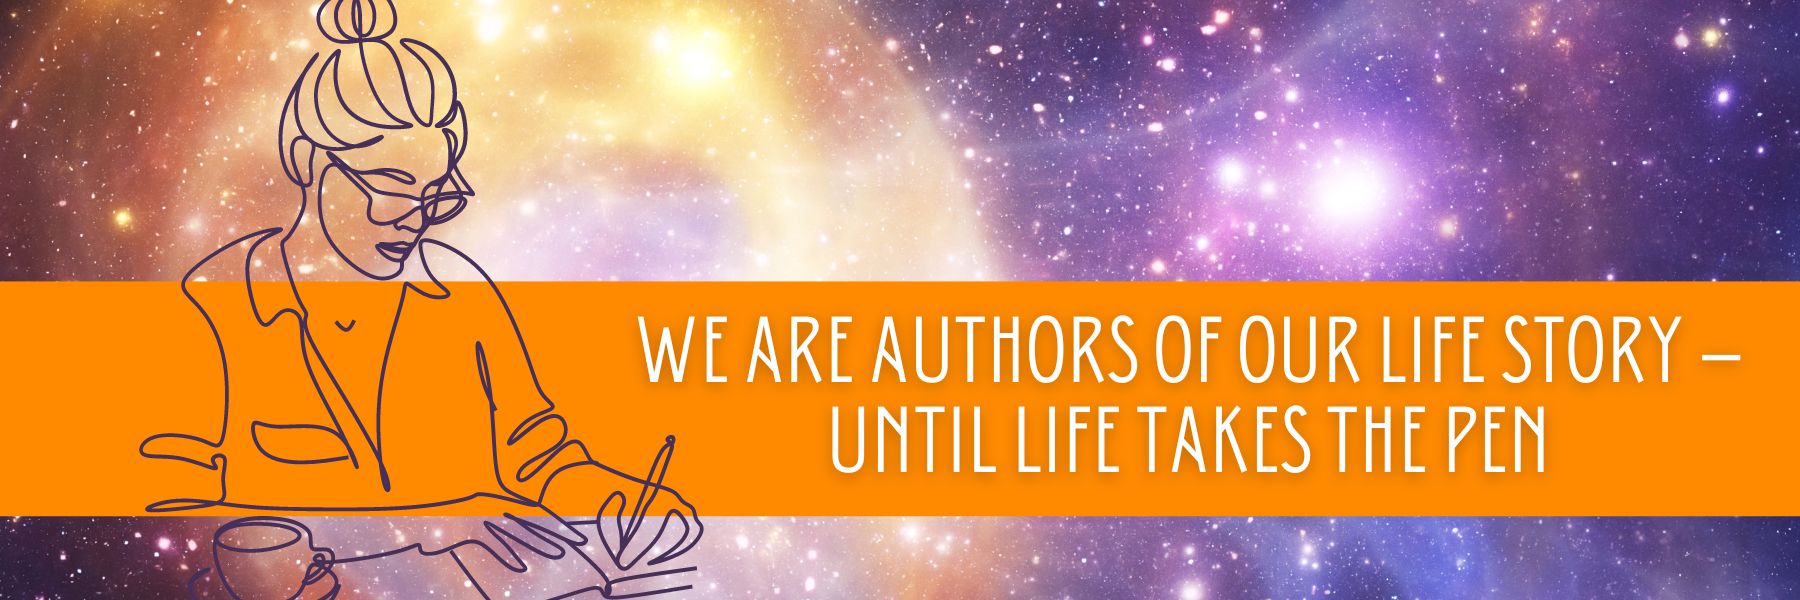 We Are Authors of Our Life Story – Until Life Takes the Pen (1)